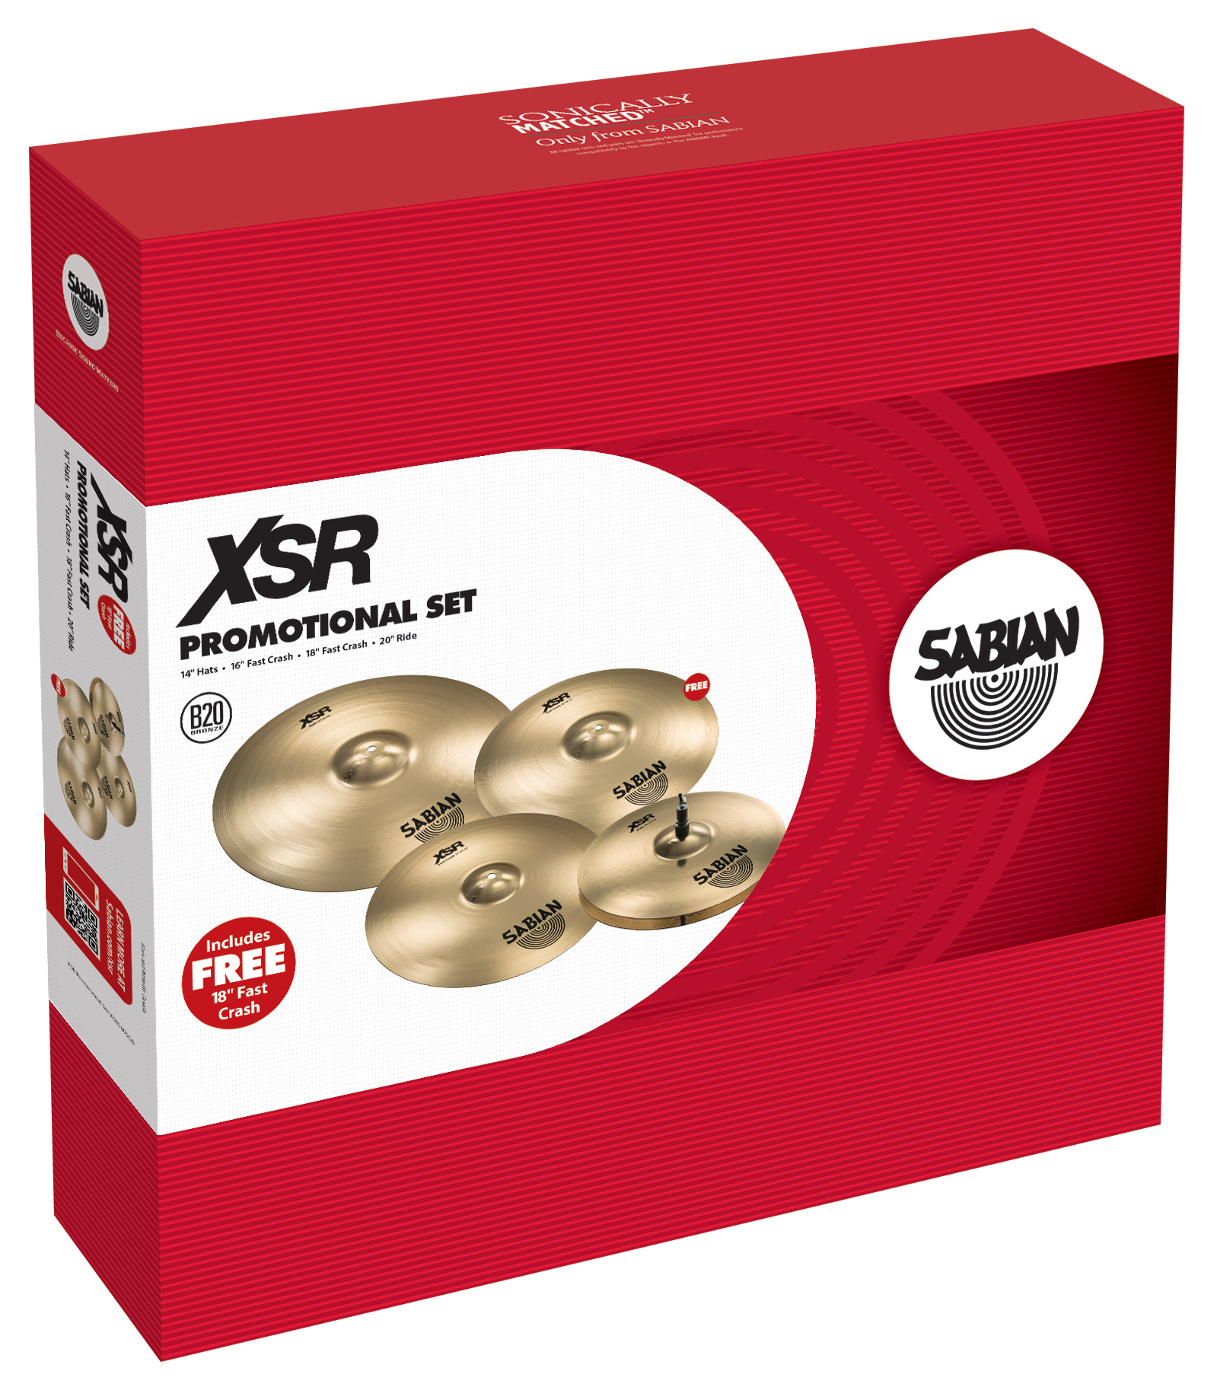 Sabian XSR5005GB XSR Performance Set Cymbal Pack with 14